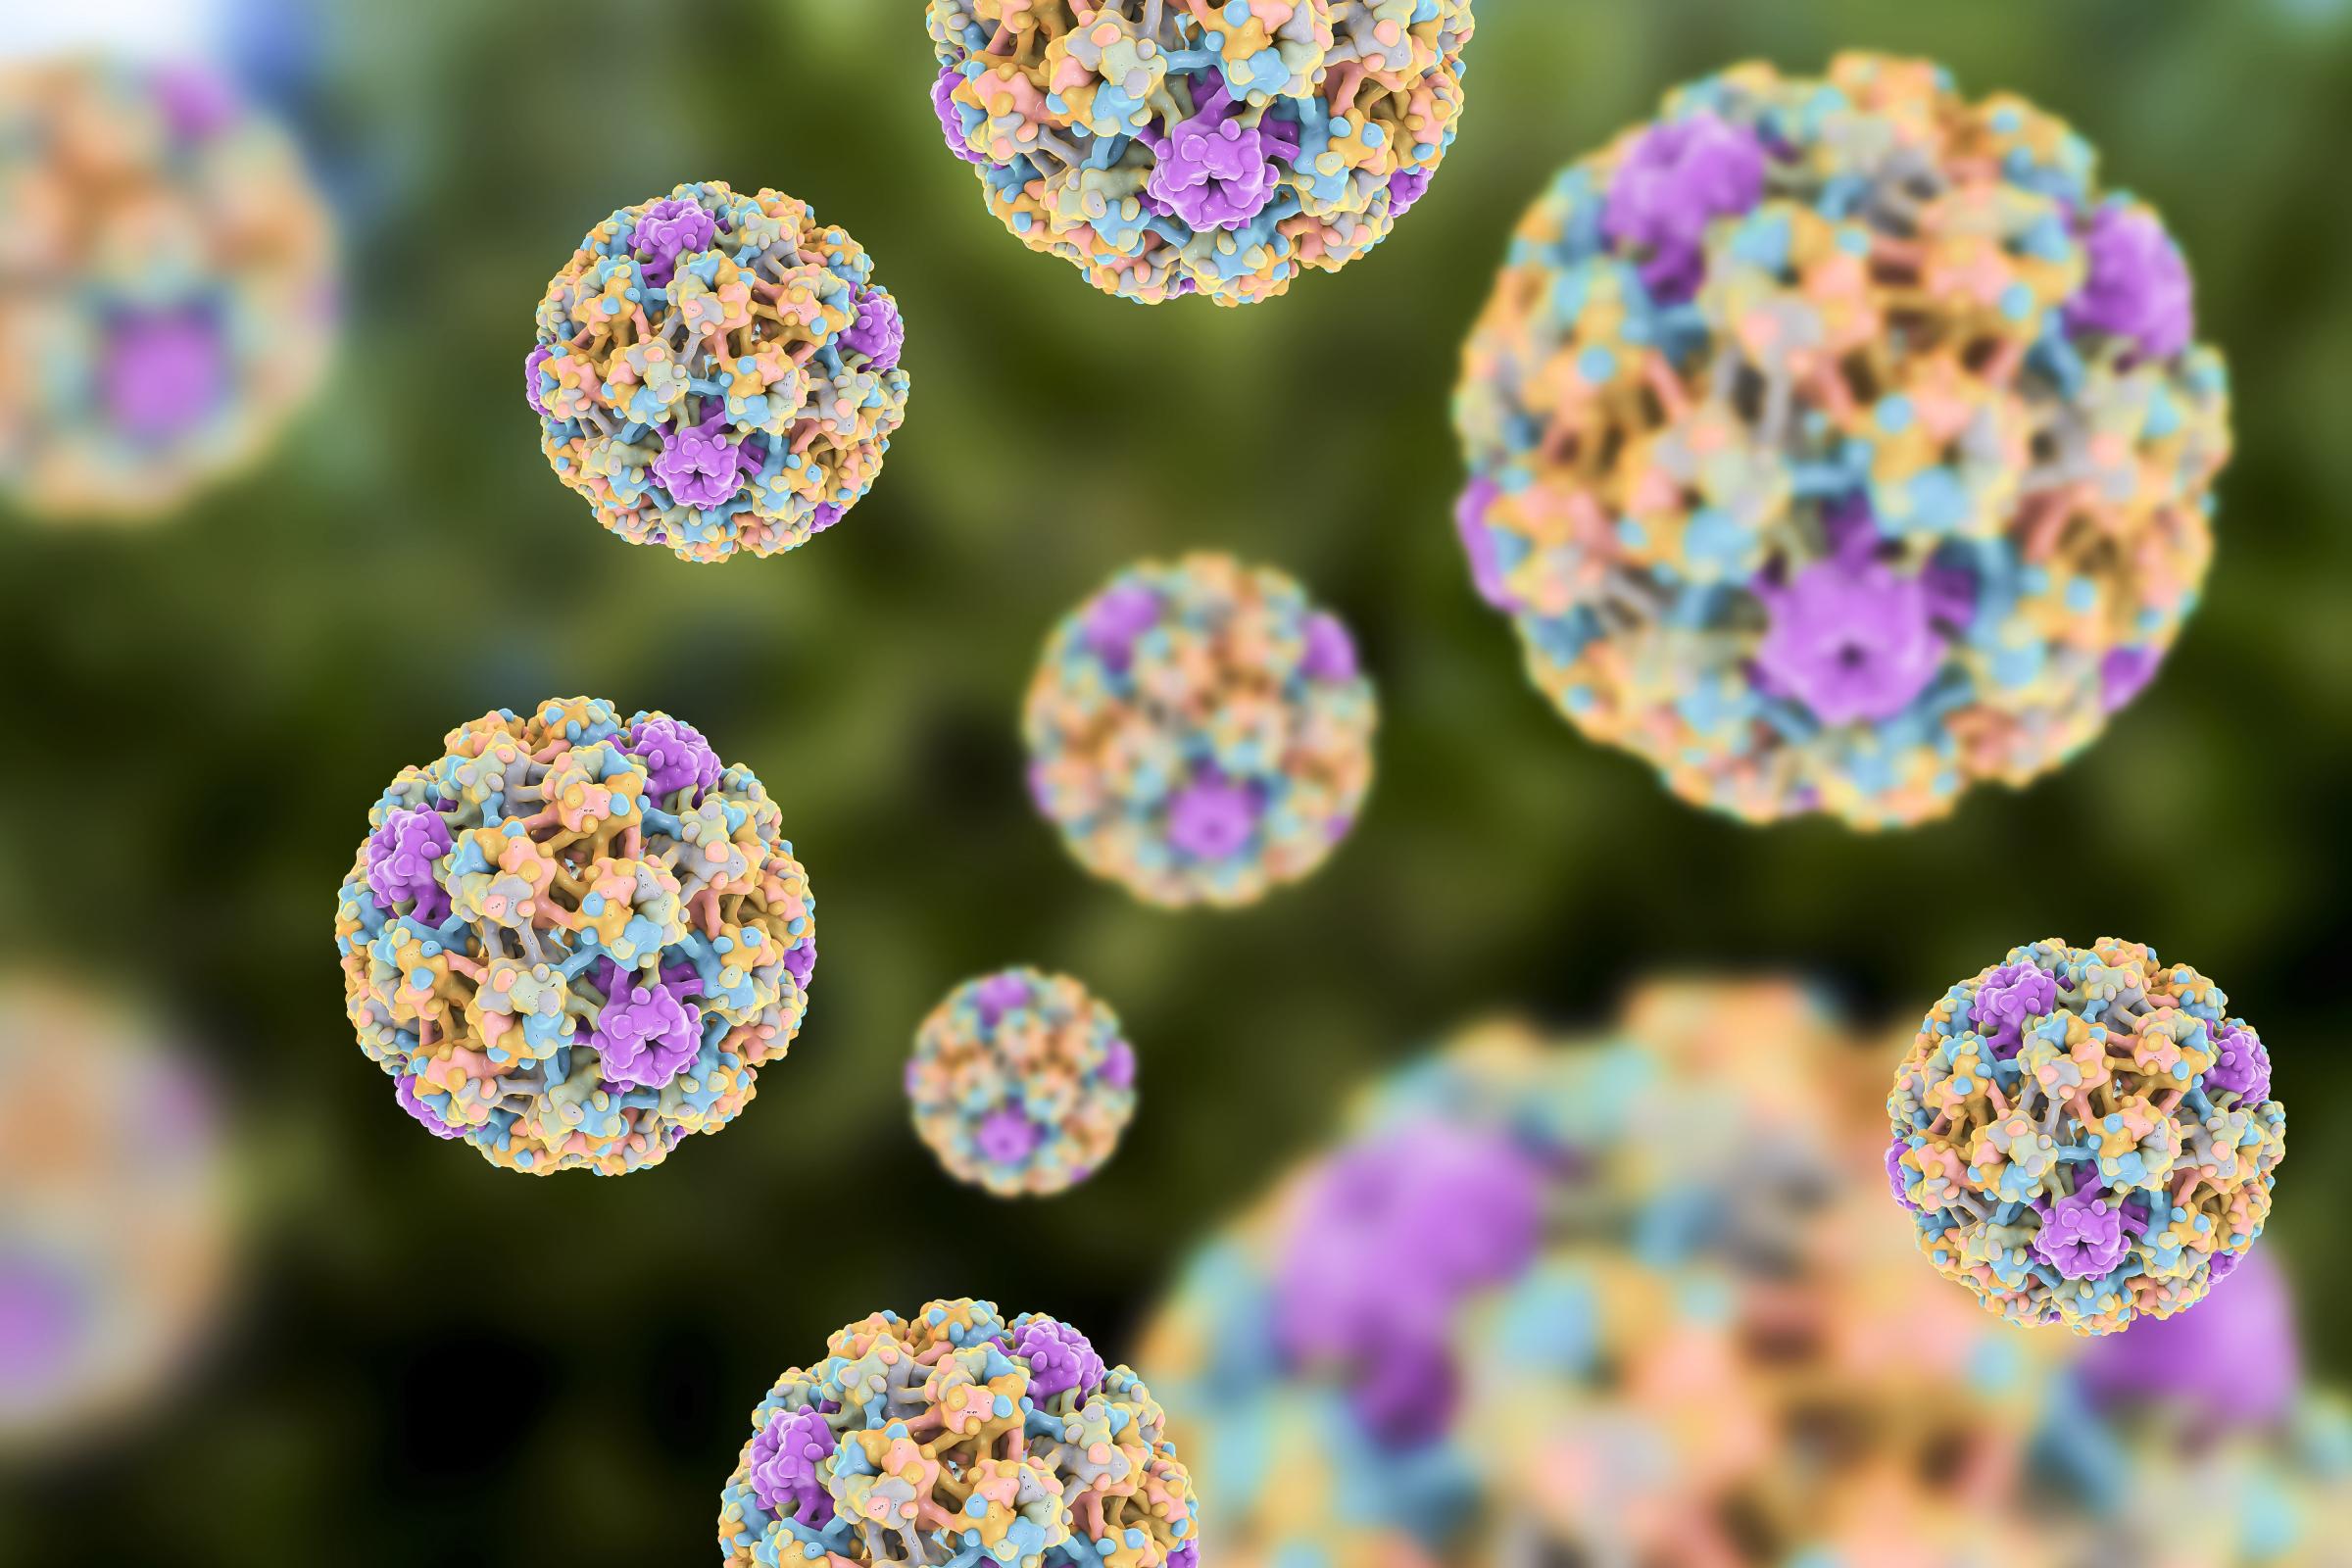 Research shows stigma around HPV as half of women don't know about virus